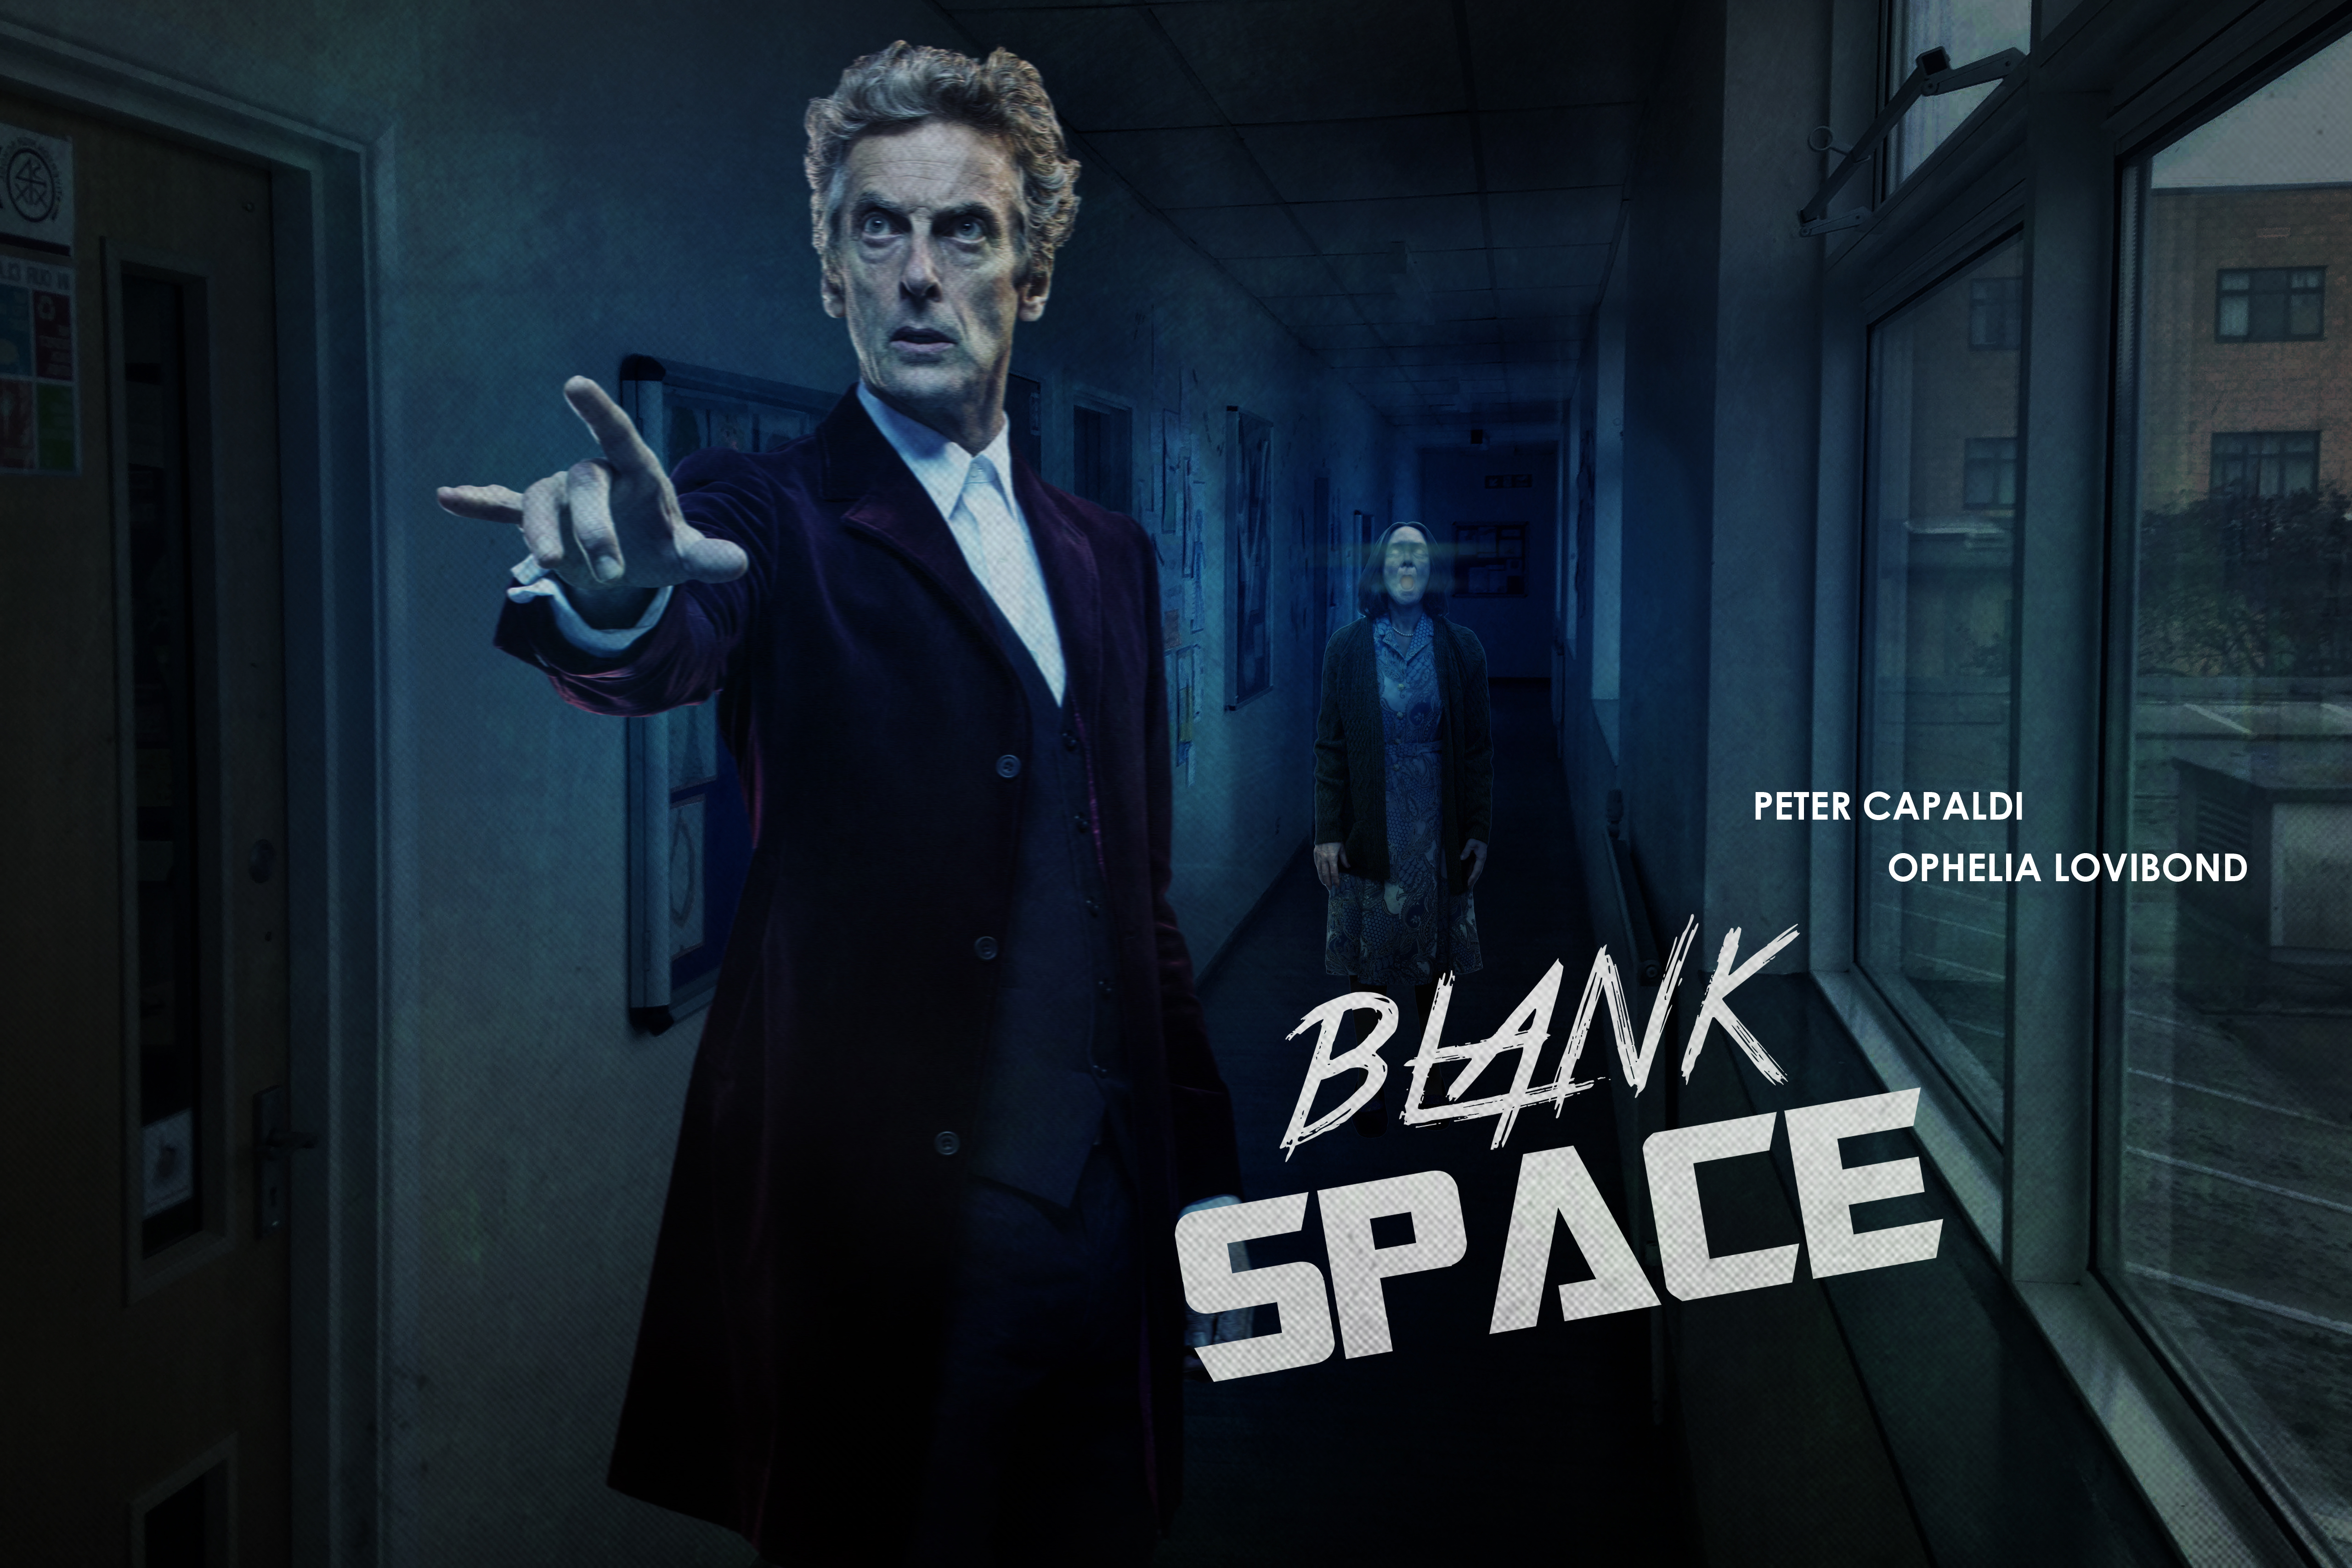 doctor_who_s10e03___blank_space_by_swannmadeleine-dauycw2.jpg